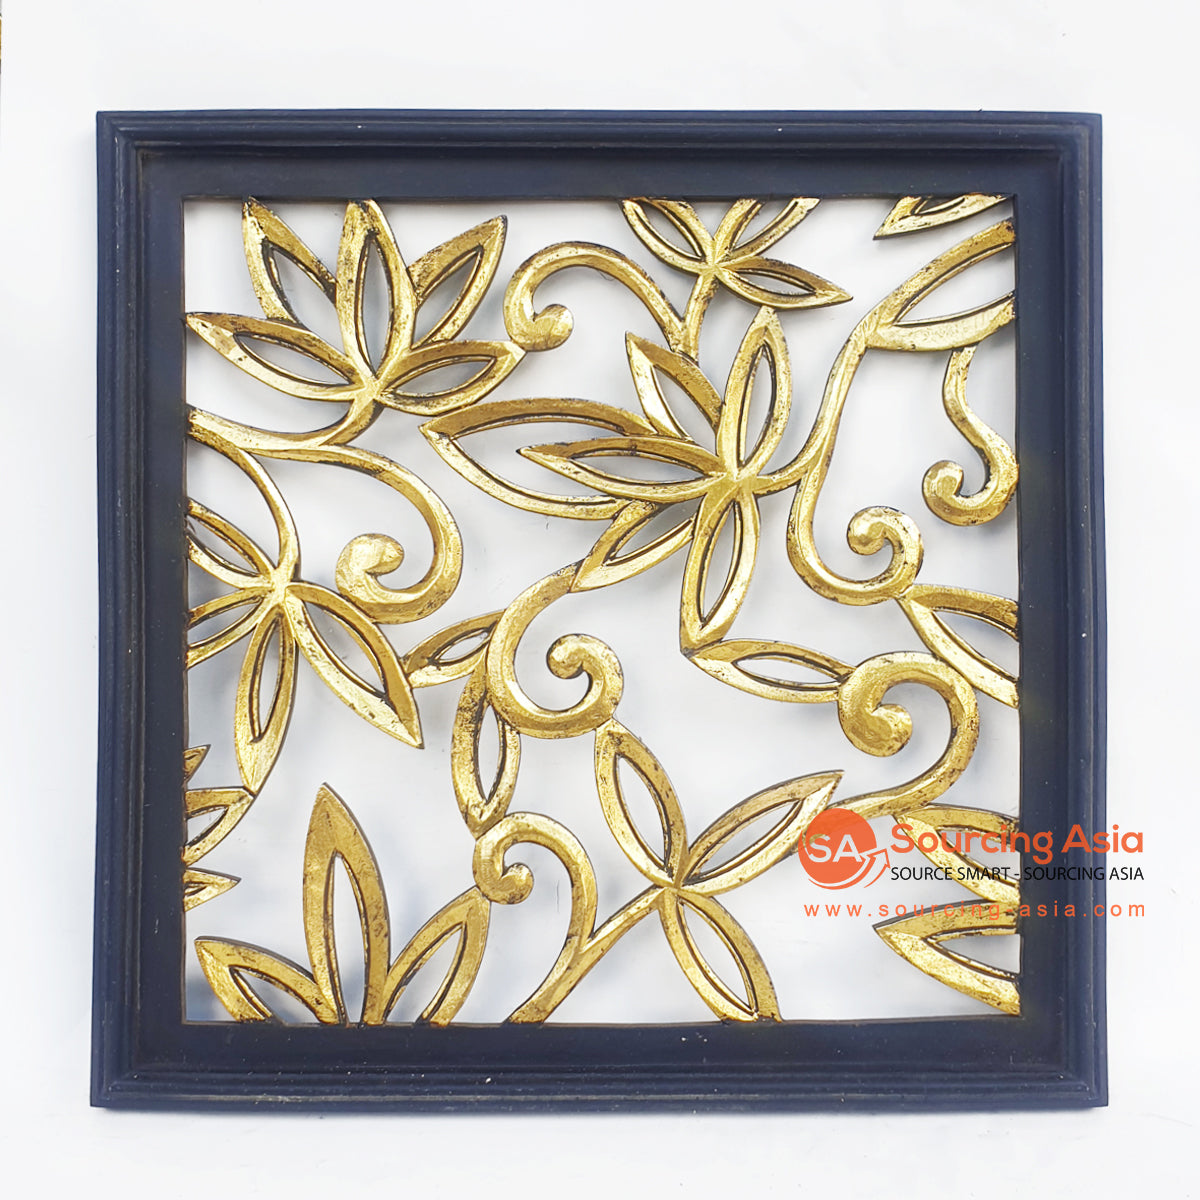 LUHC041 DARK BROWN AND GOLDEN WOODEN SQUARE CARVED PANEL